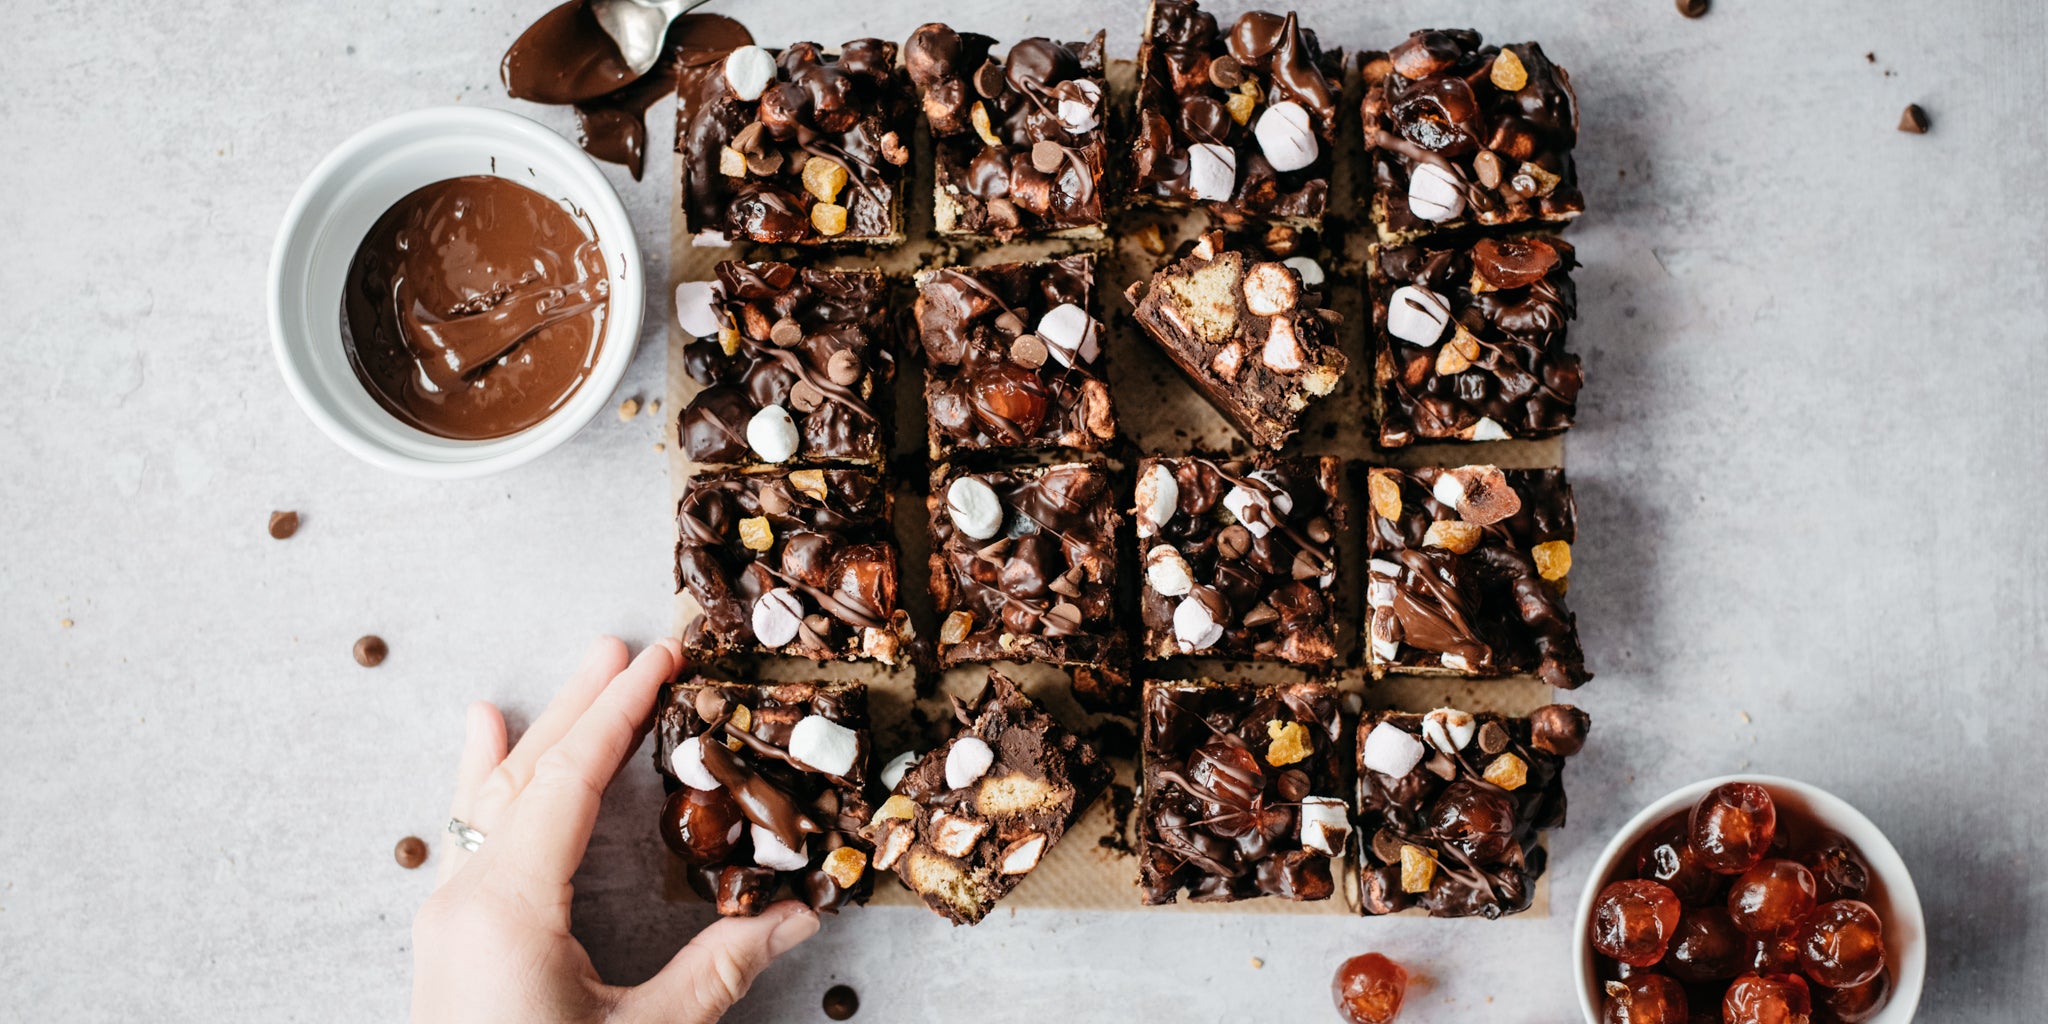 Top view of a Vegan Rocky Road traybake cut into squares, with a hand reaching for one